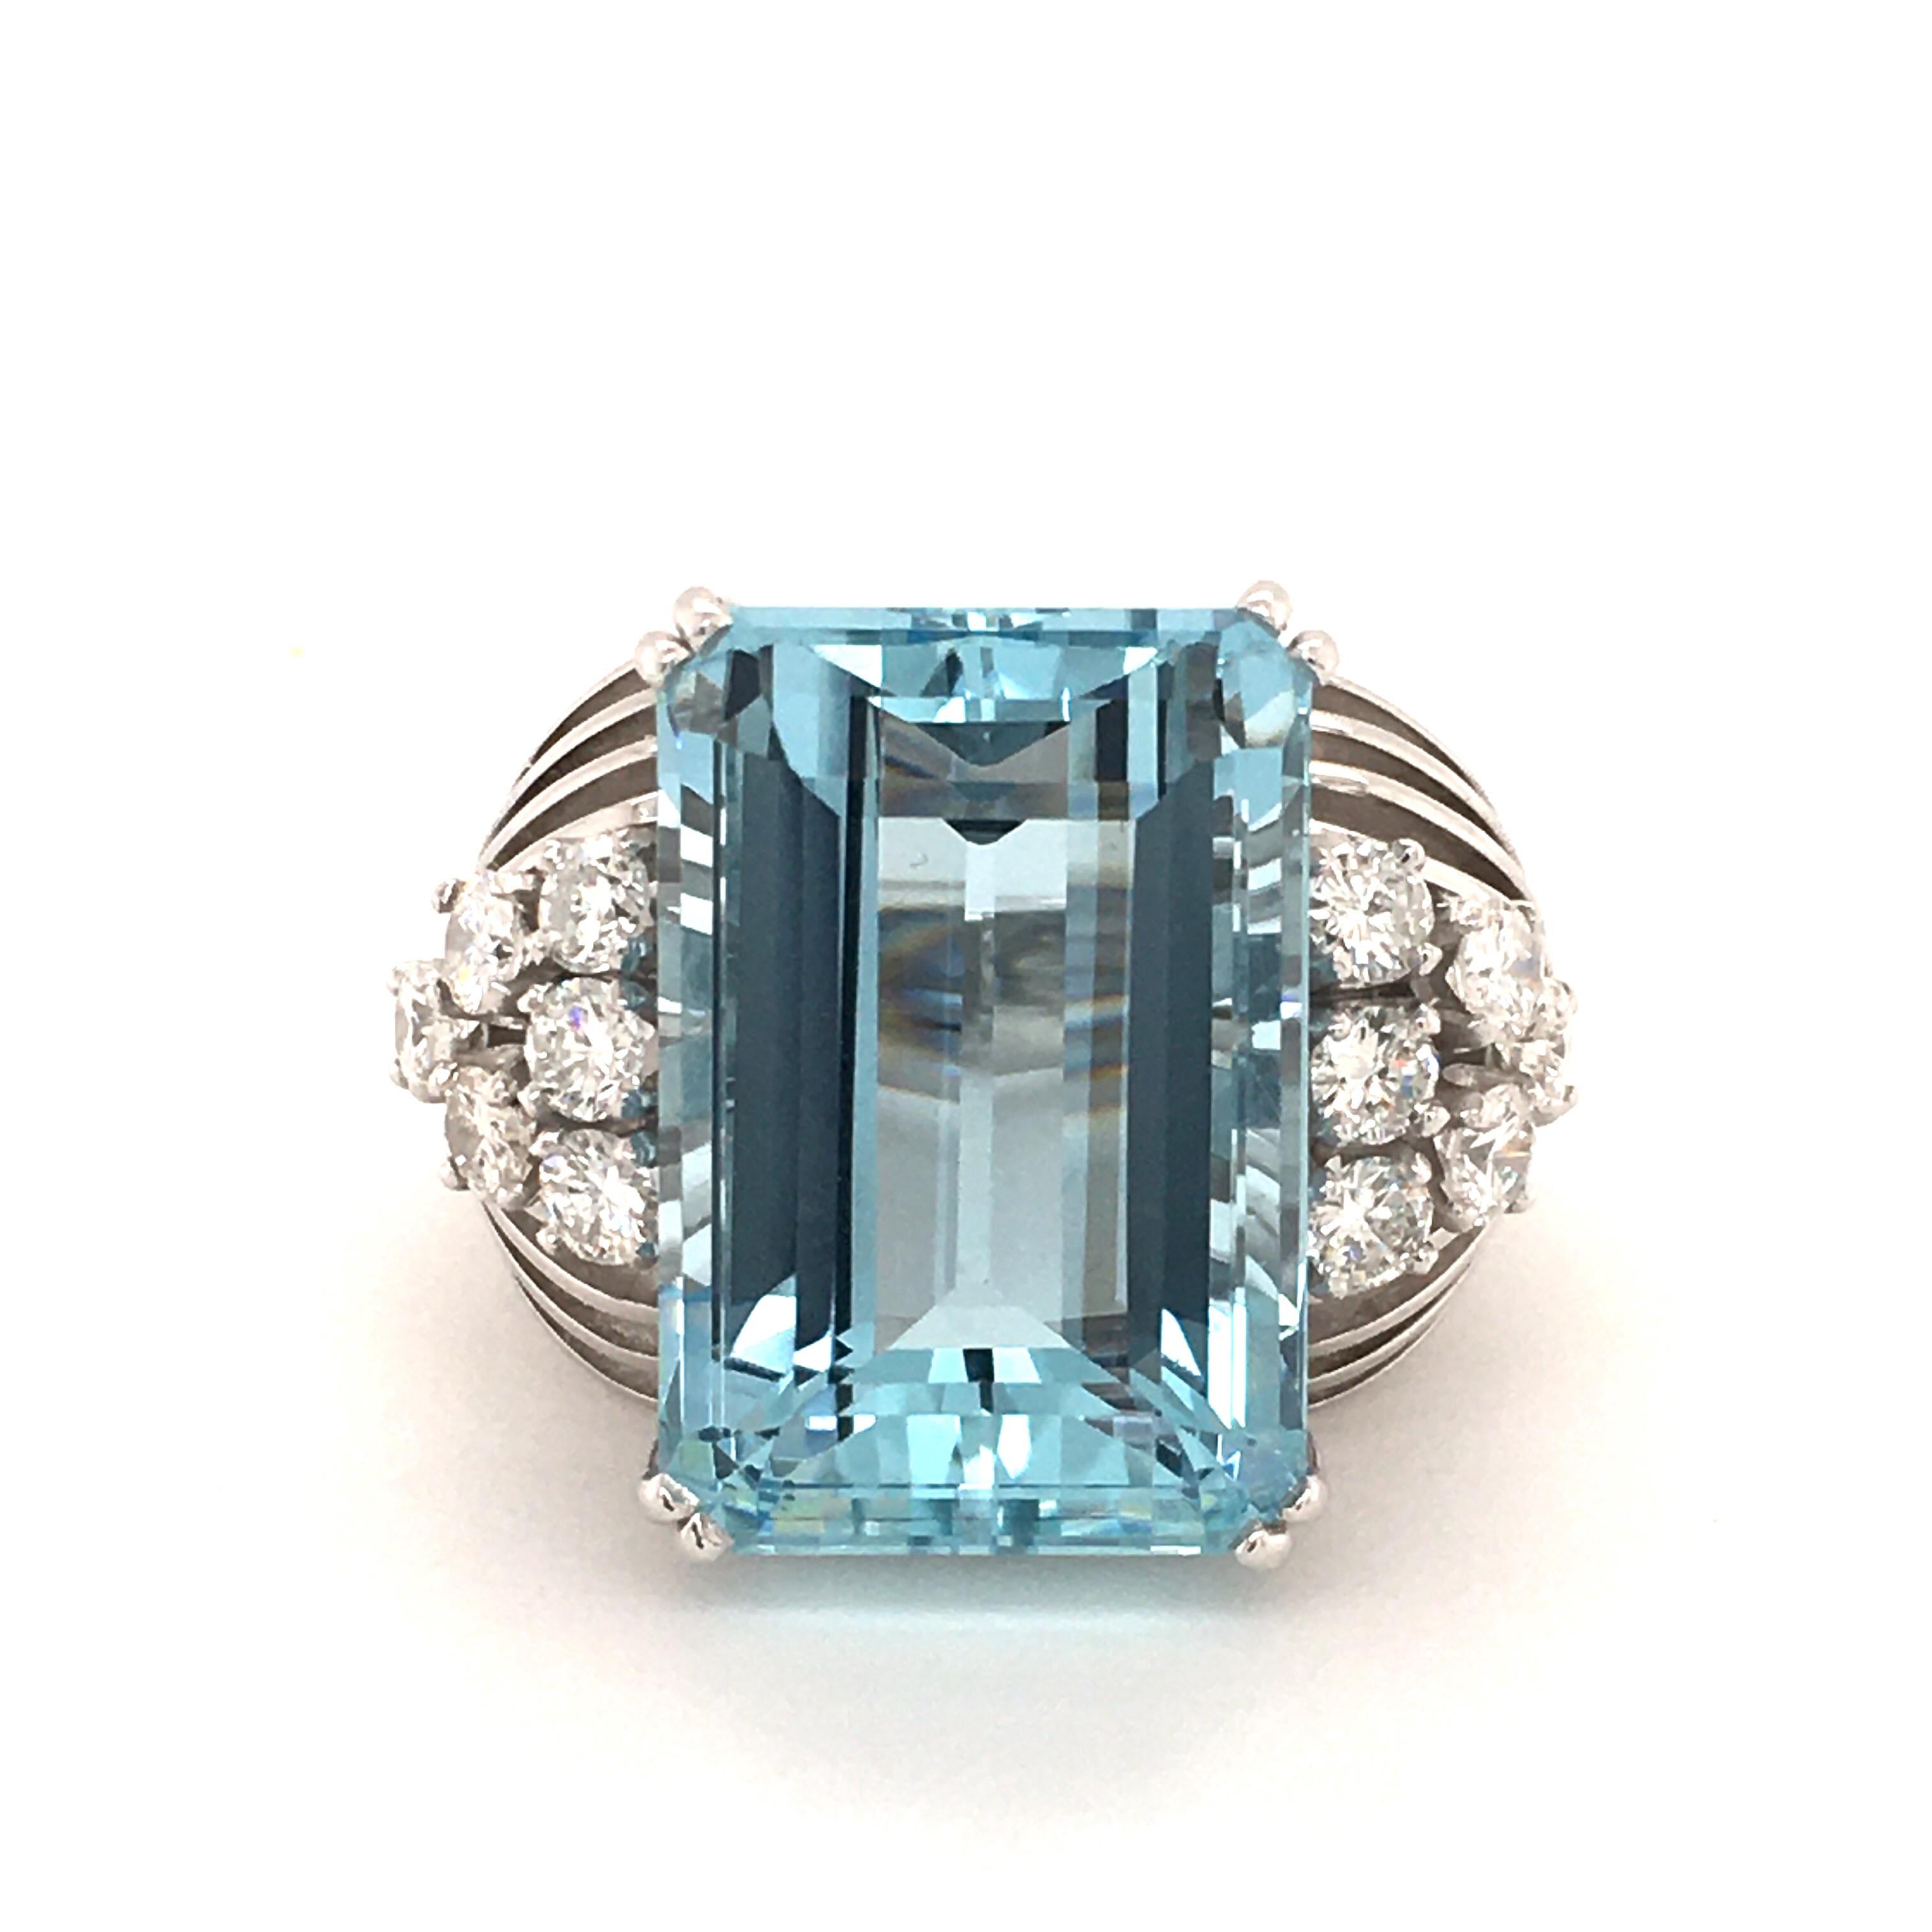 A clean aquamarine of approx. stunning 18 carats and 12 brilliant cut diamonds totaling approx. 1.20 ct of G/H-vs quality are mounted in this 14K white gold ring.

Please, ask for additional pictures if you are interested in this item.

Size: 55.5 /